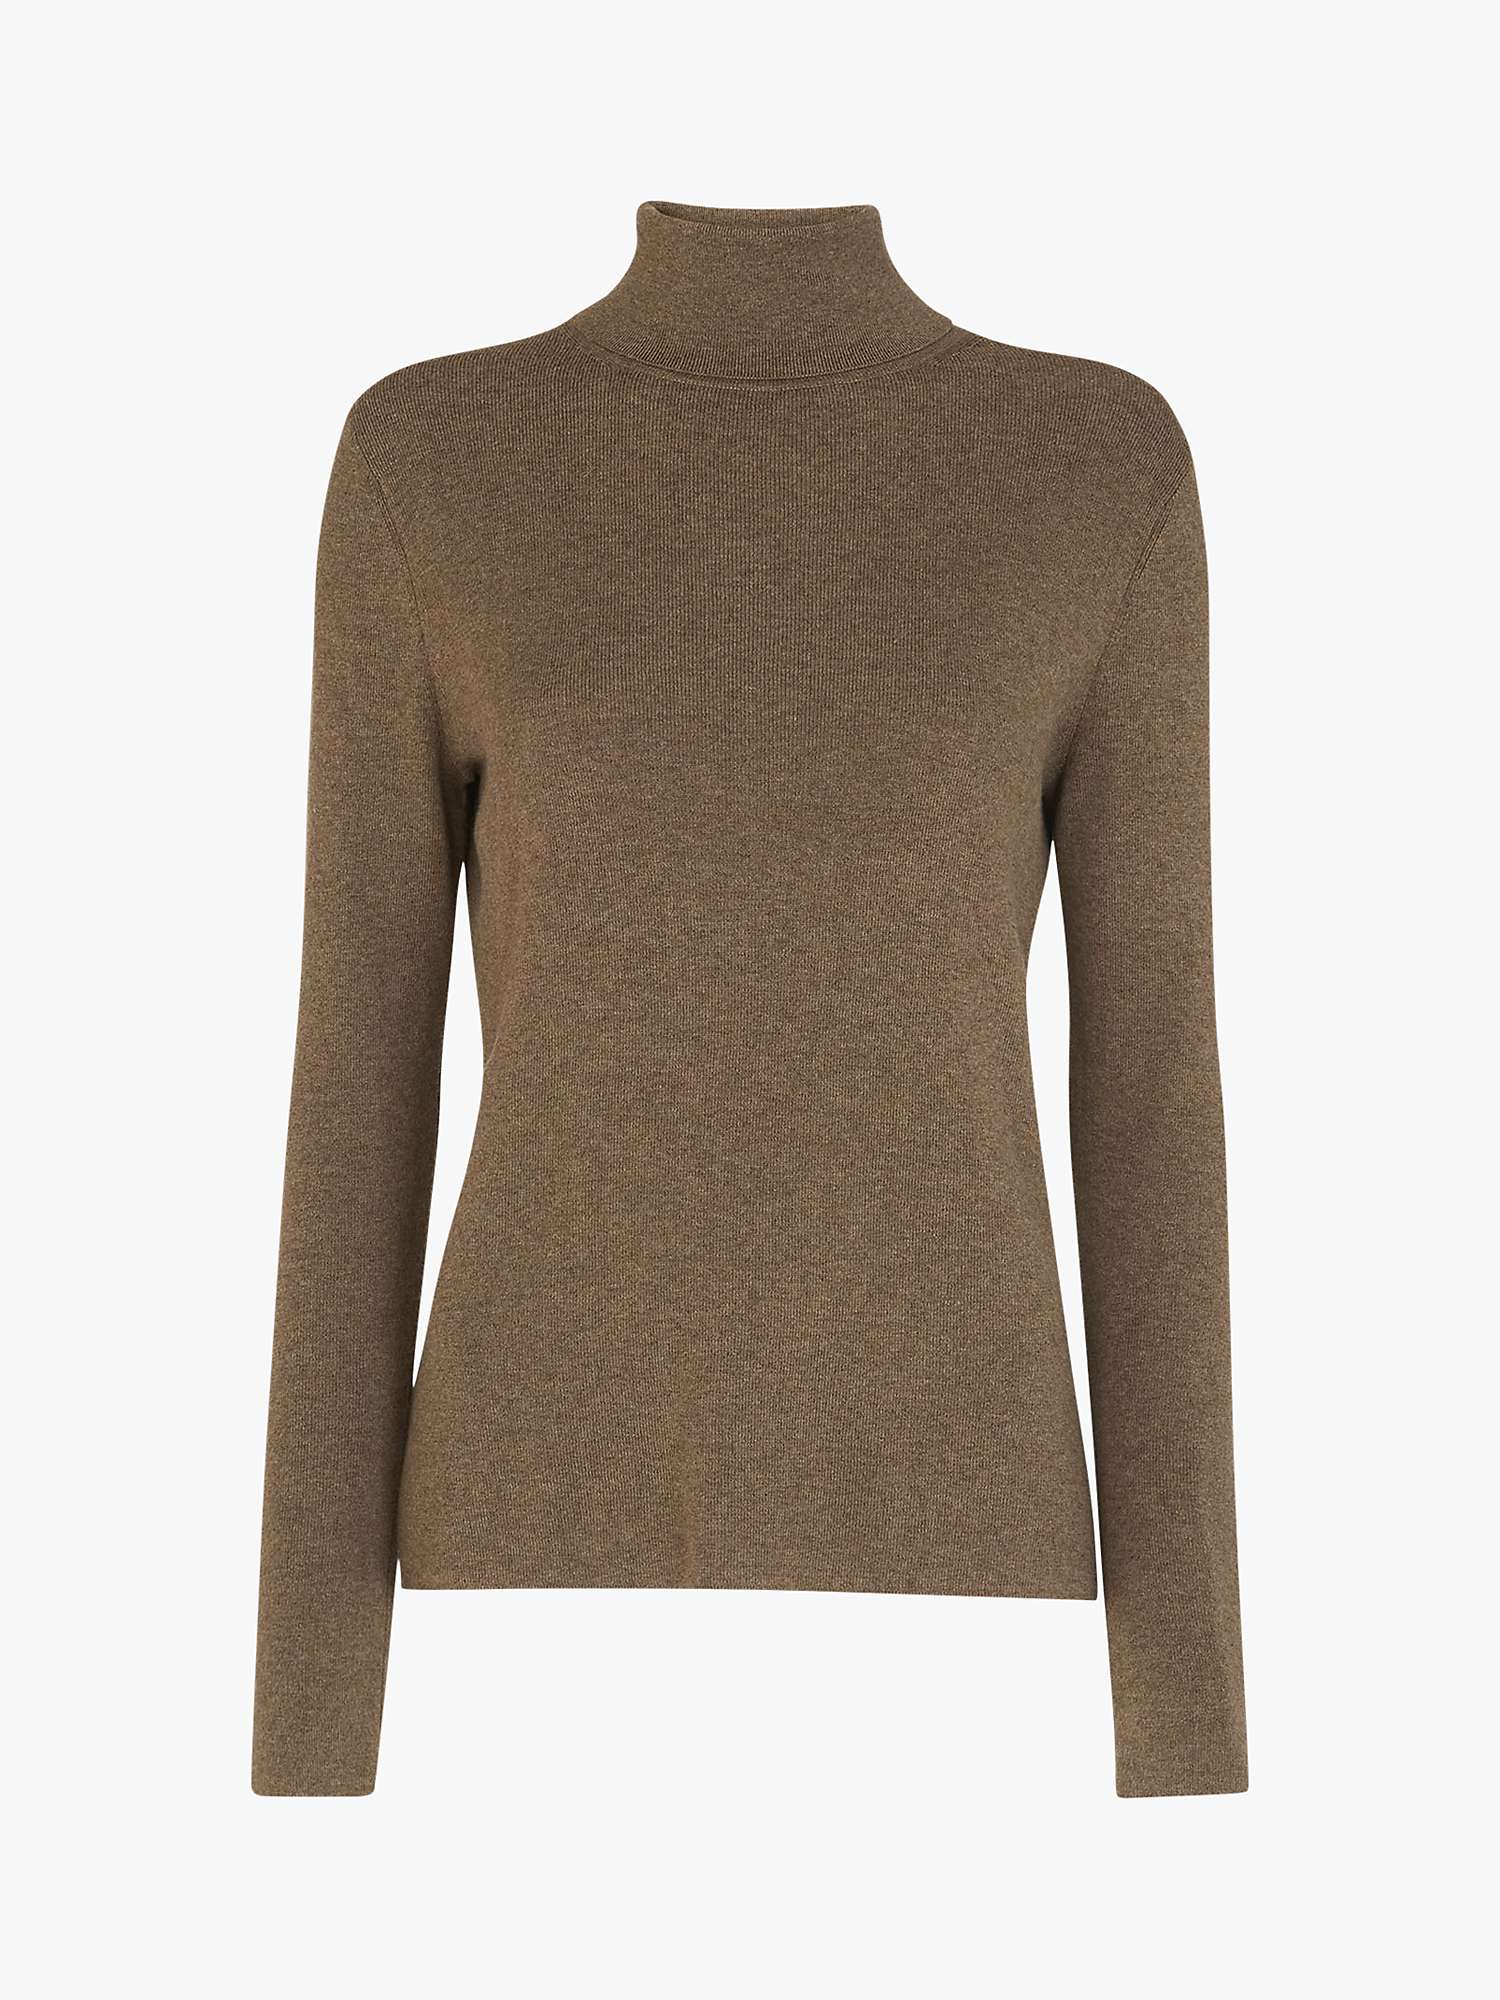 Whistles Maja Knitted Roll Neck Jumper, Oatmeal at John Lewis & Partners